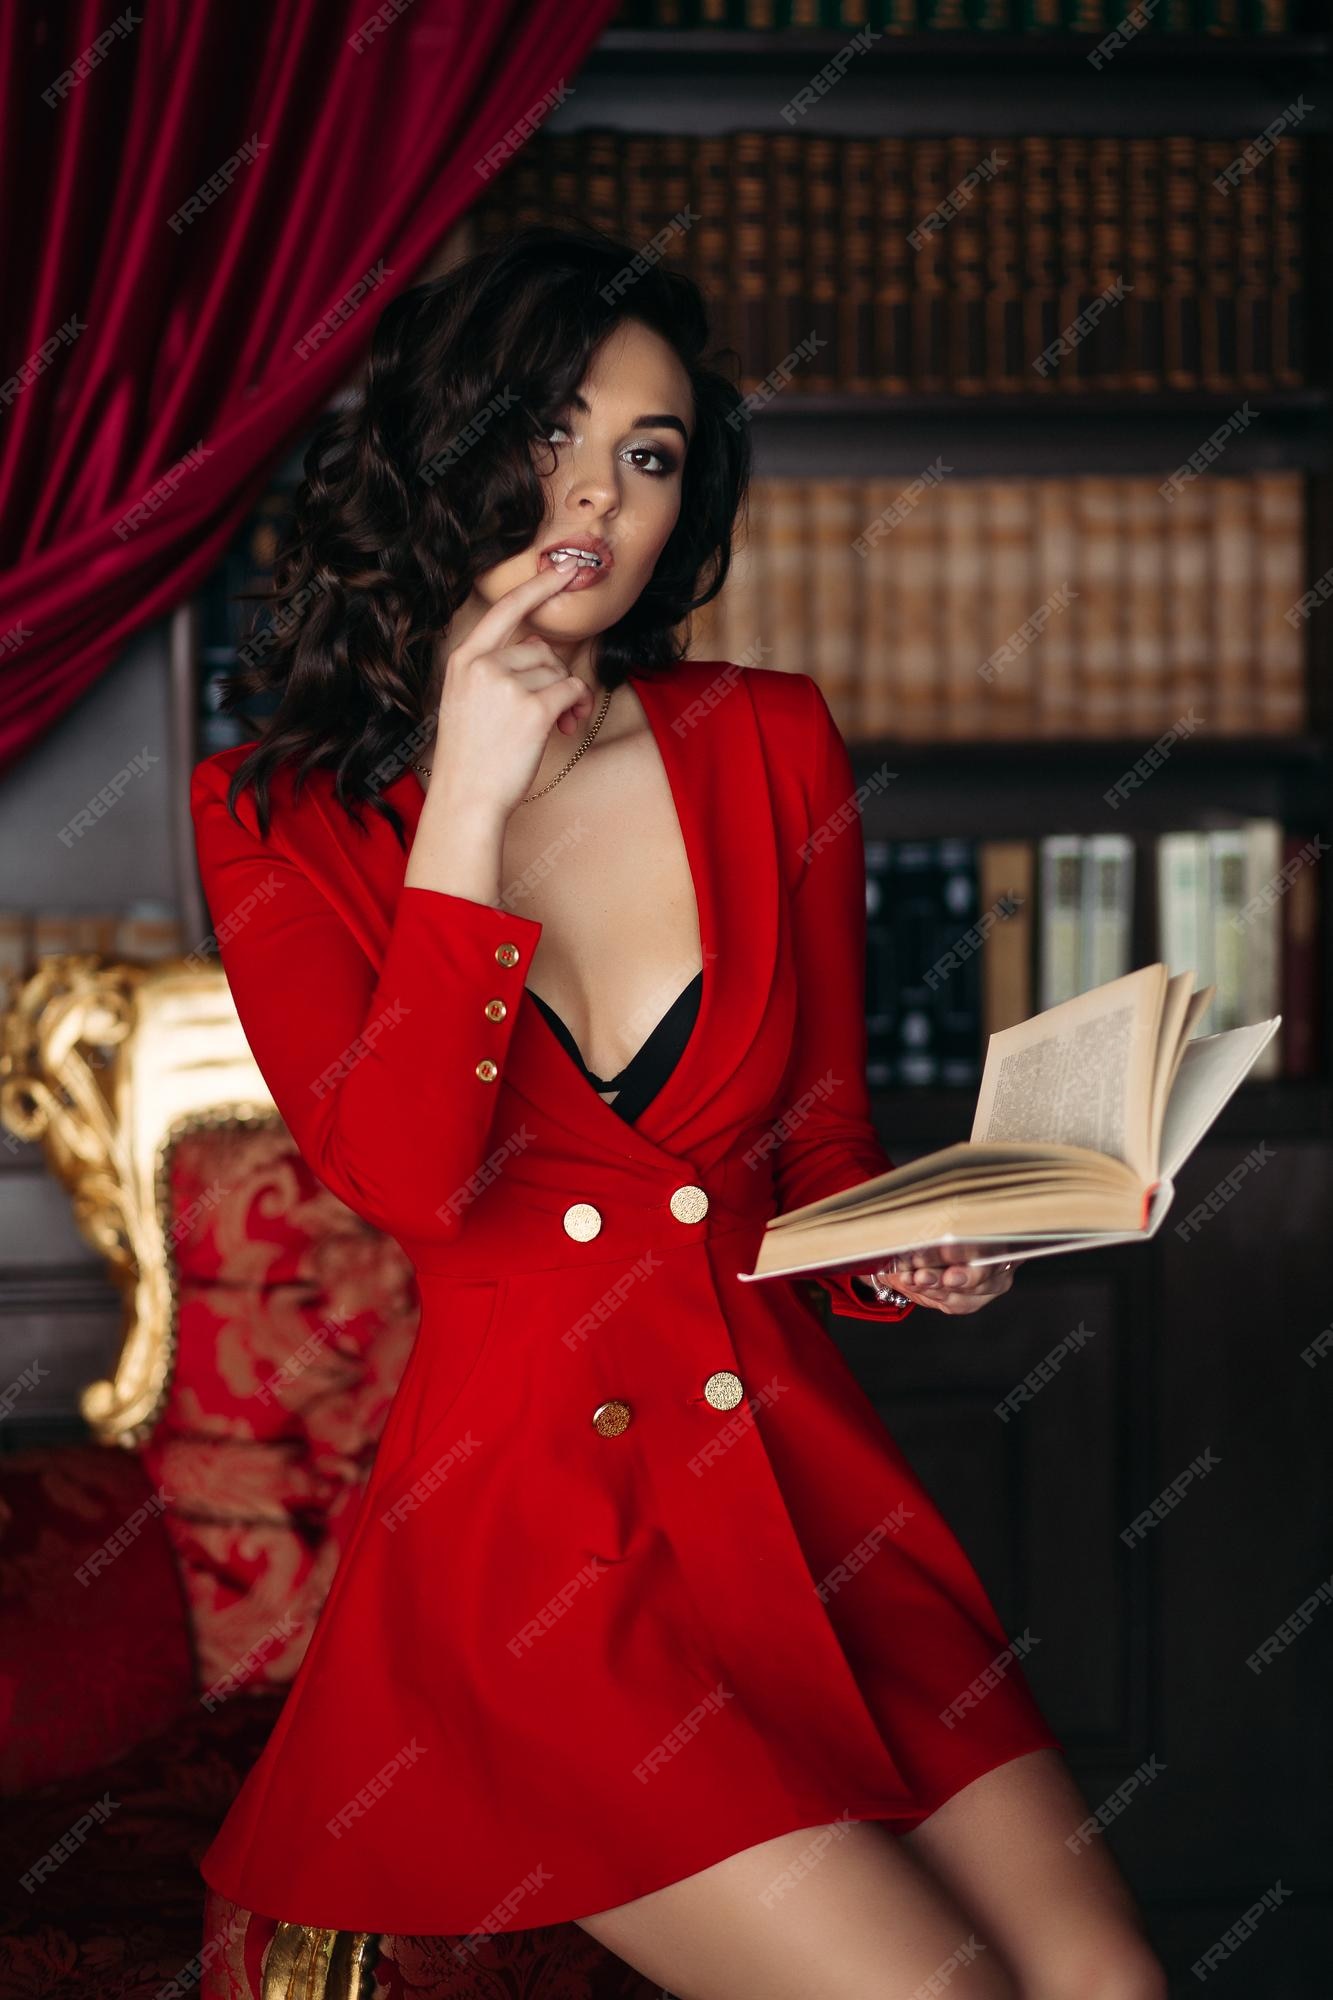 Premium Photo | Hot girl in red dress touching her holding book in hand